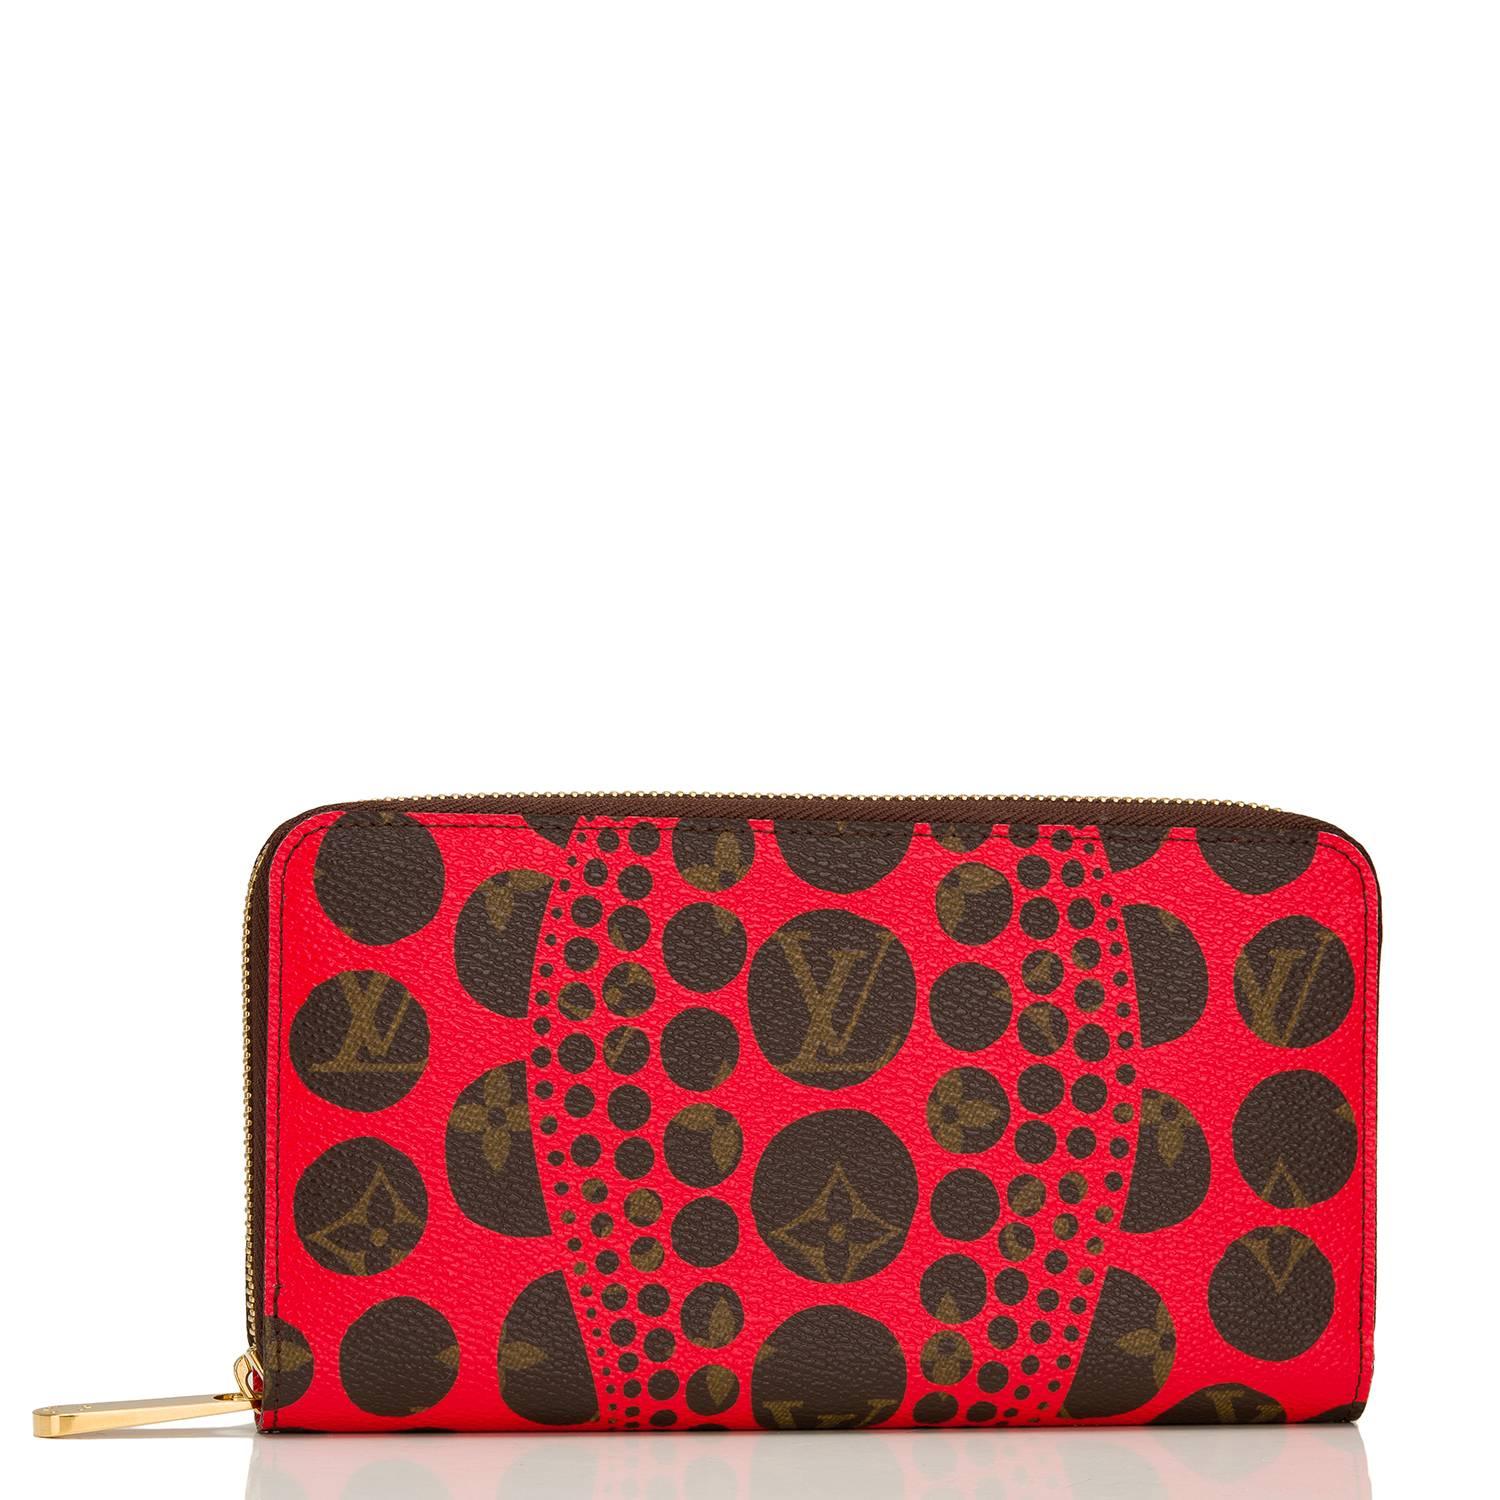 Louis Vuitton Yayoi Kusama Monogram Pumpkin Dots Zippy Wallet of red coated canvas and polished brass hardware.

This limited edition wallet has an abstract dots and wave design of red silk screened over the classic Monogram design and a 3/4 wrap